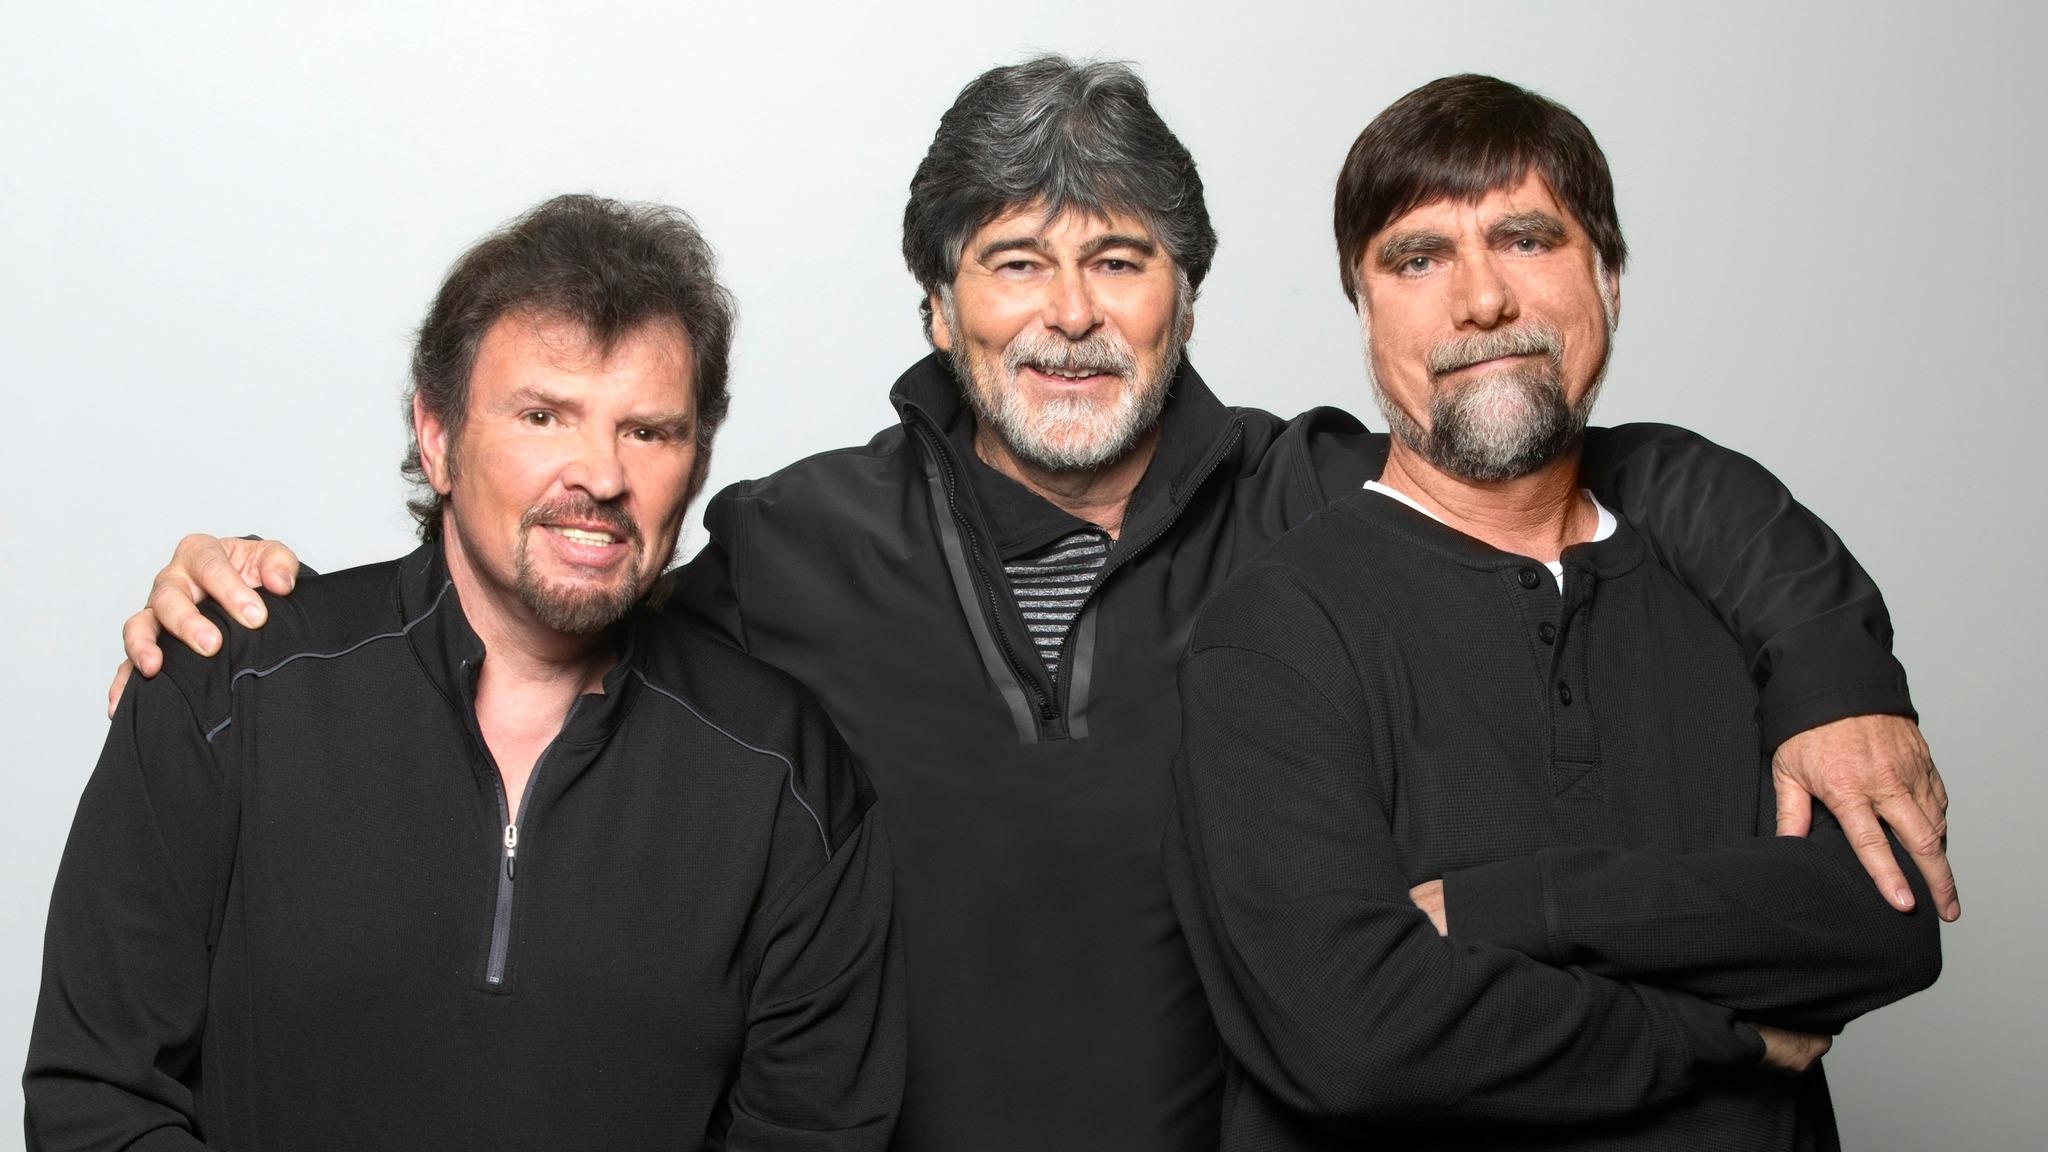 Alabama: Live In Concert at First National Bank Arena